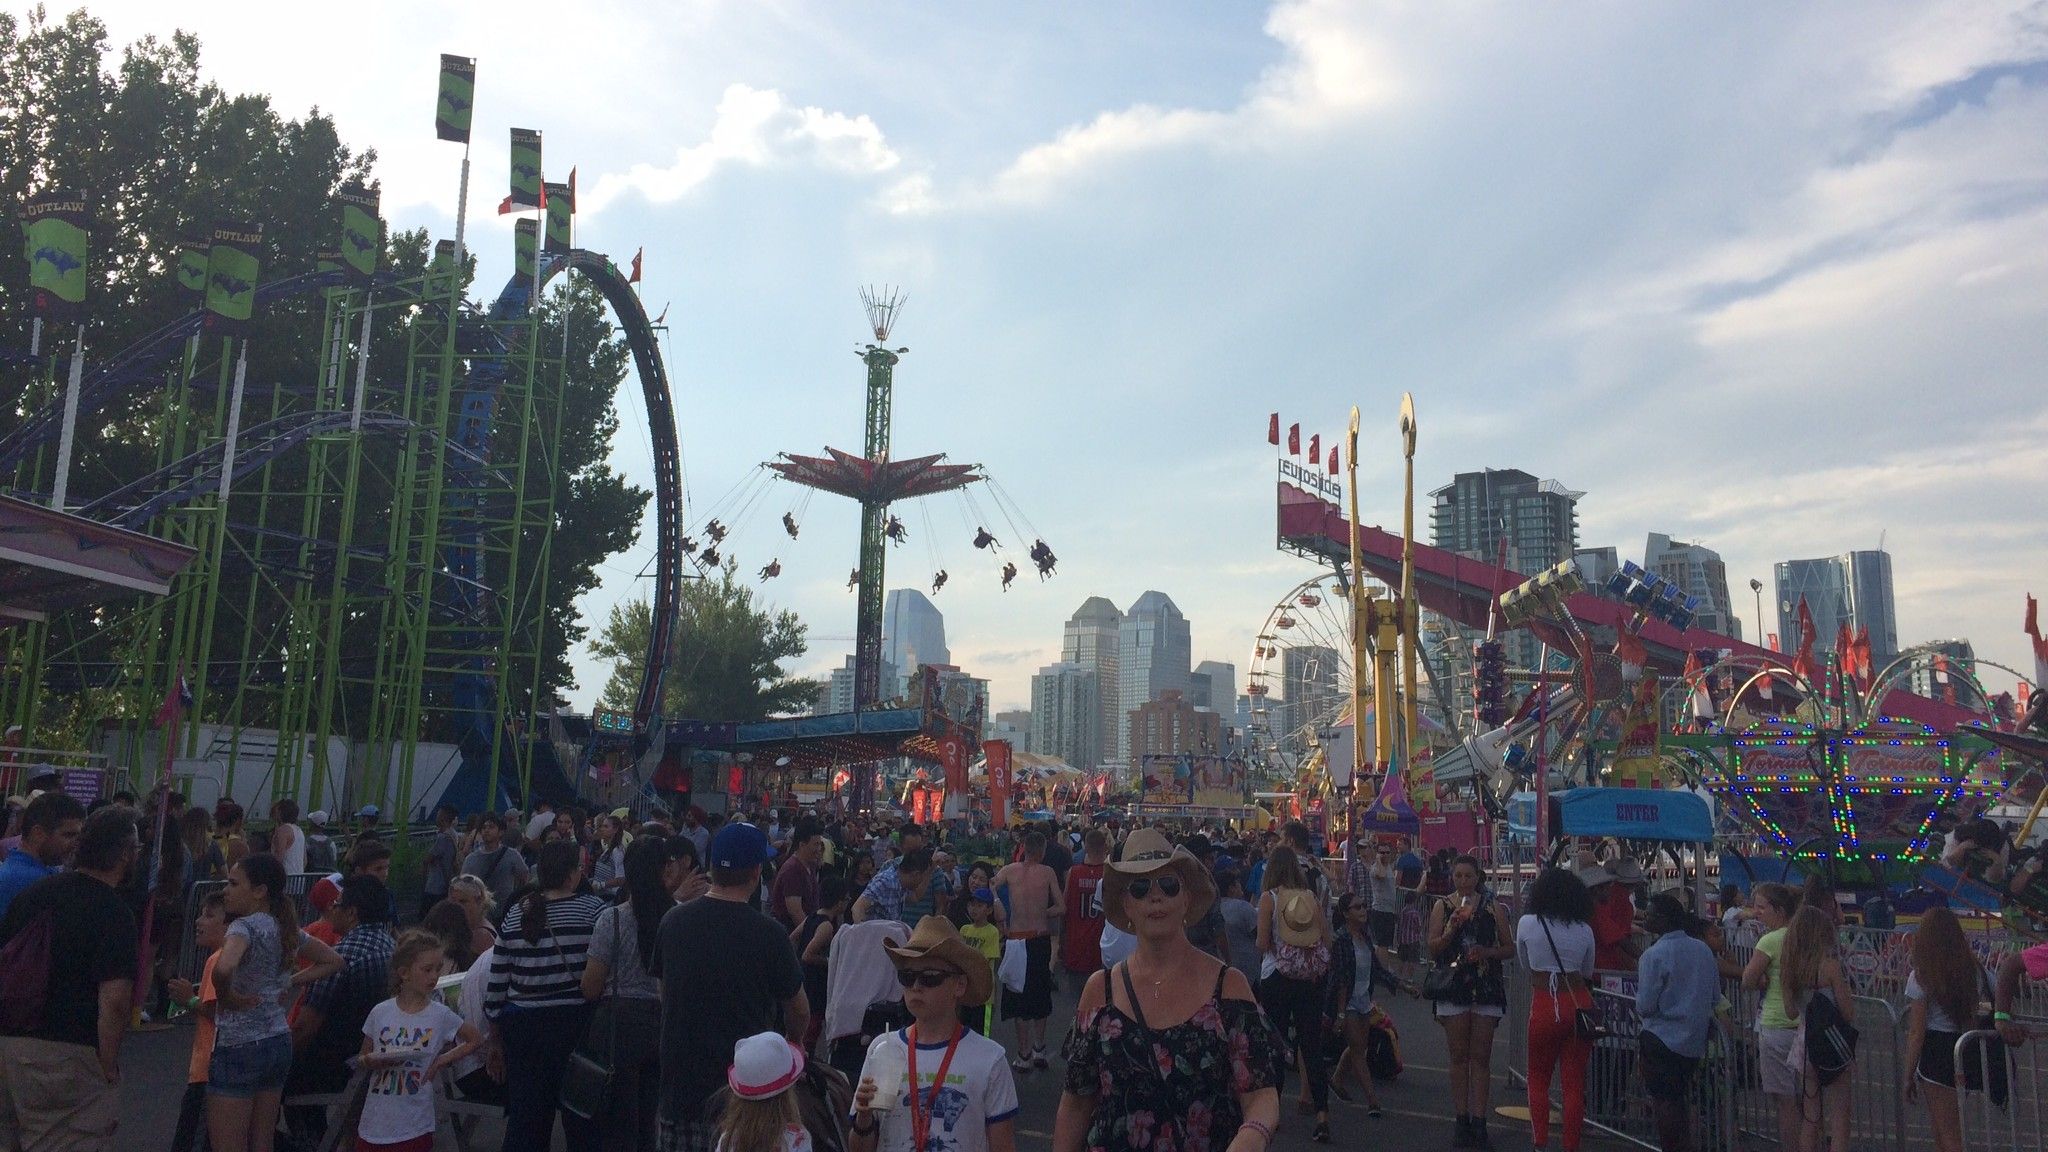 People at the Calgary Stampede, which was attended by many unvaccinated Albertans. (Getty)